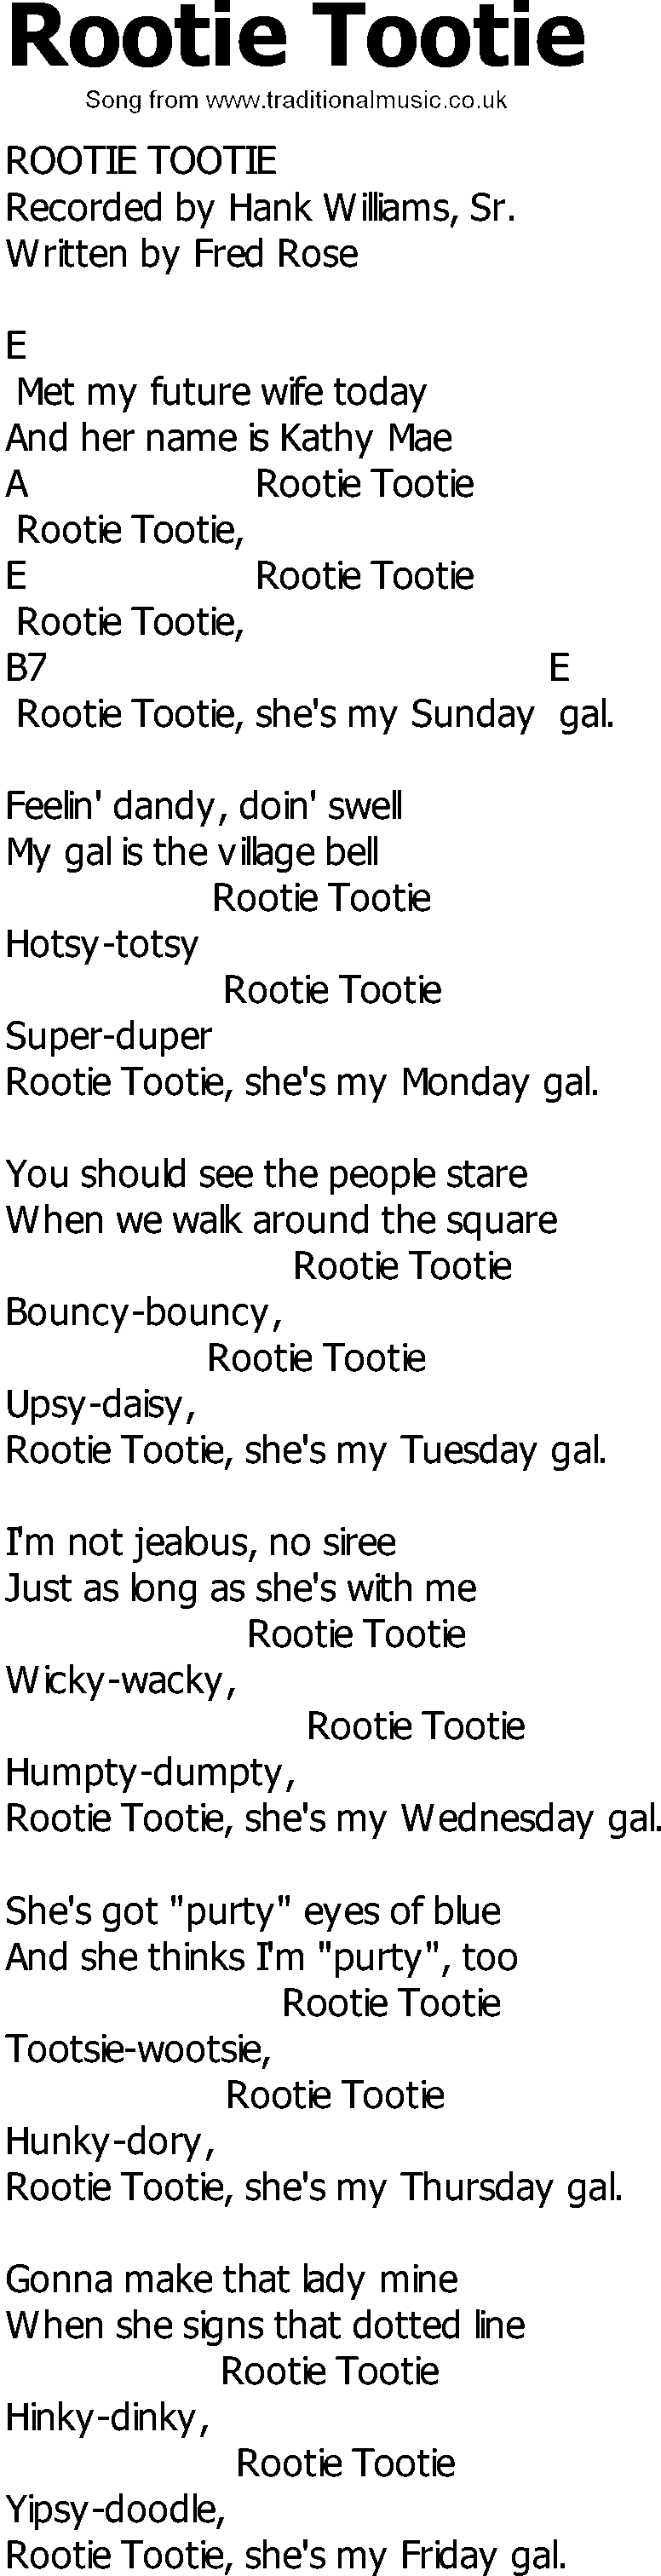 Old Country song lyrics with chords - Rootie Tootie